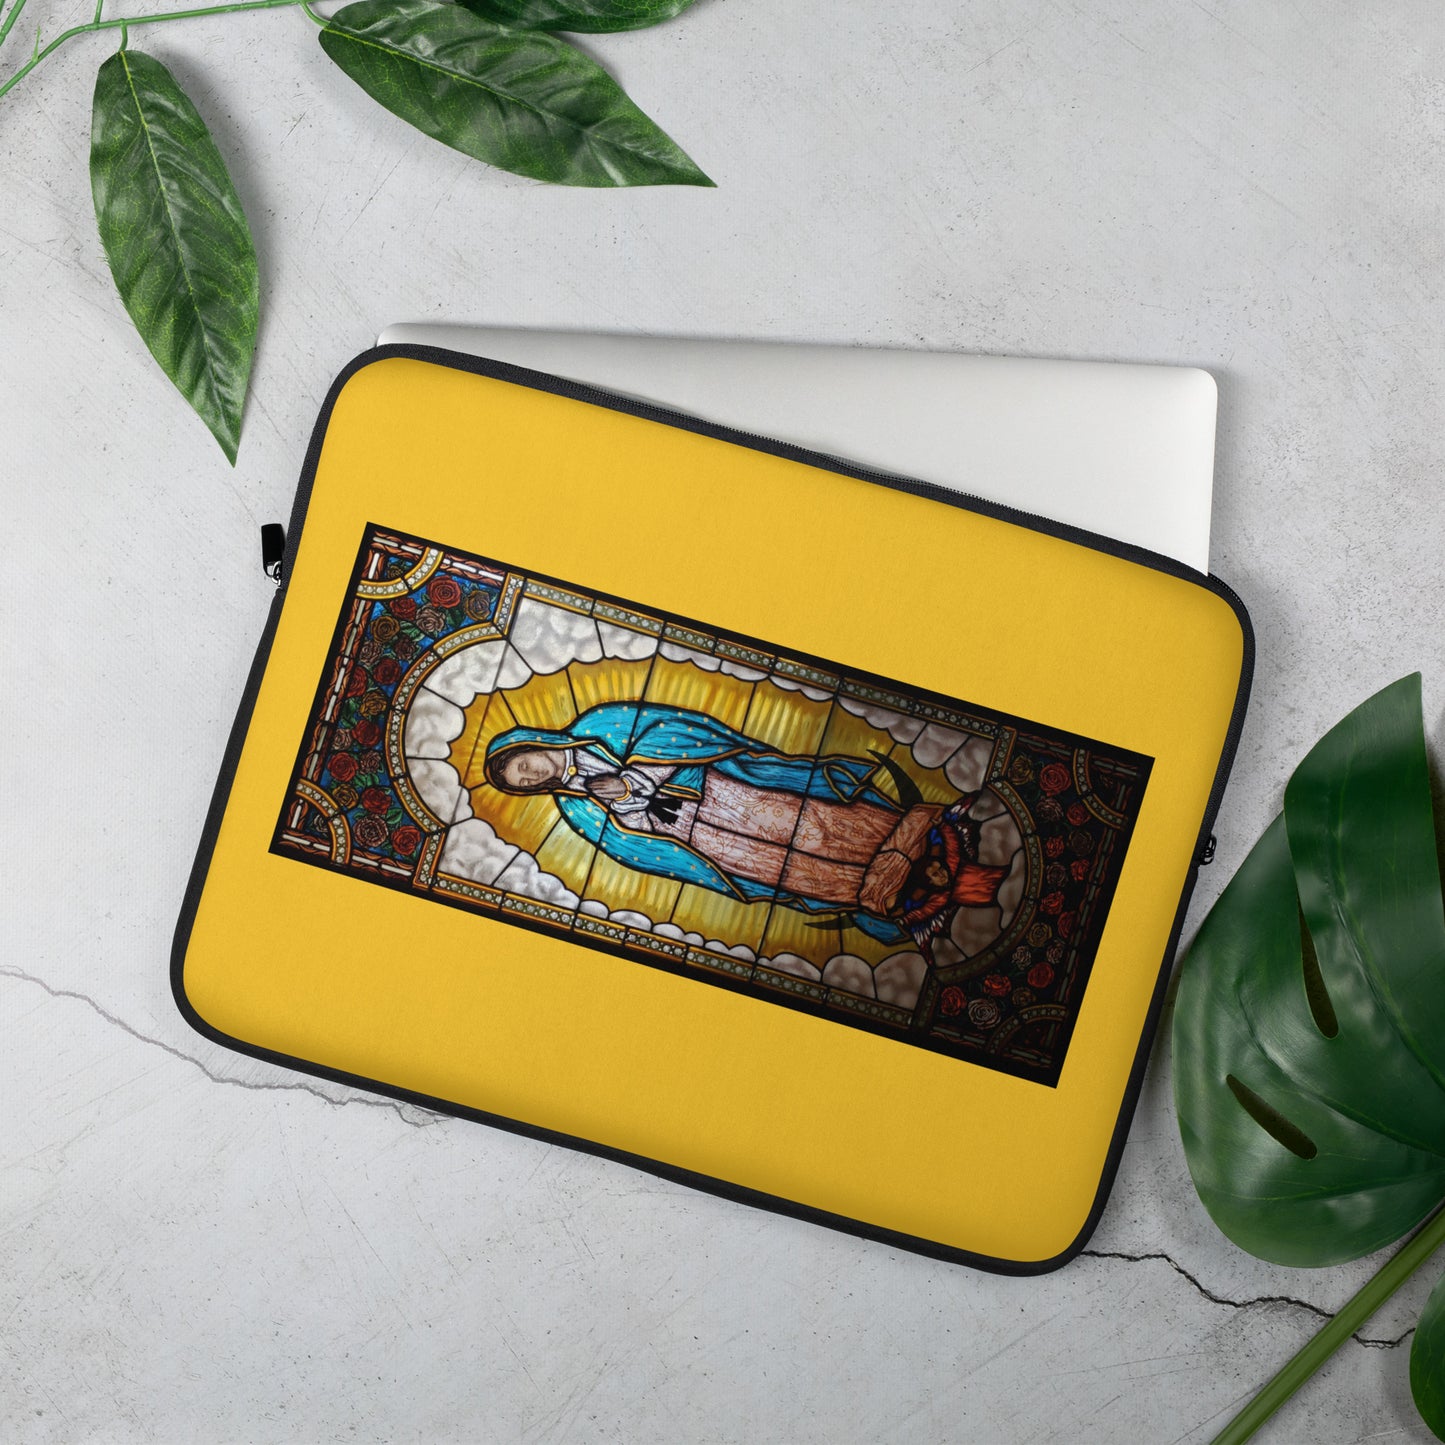 Our Lady of Guadalupe Laptop Sleeve